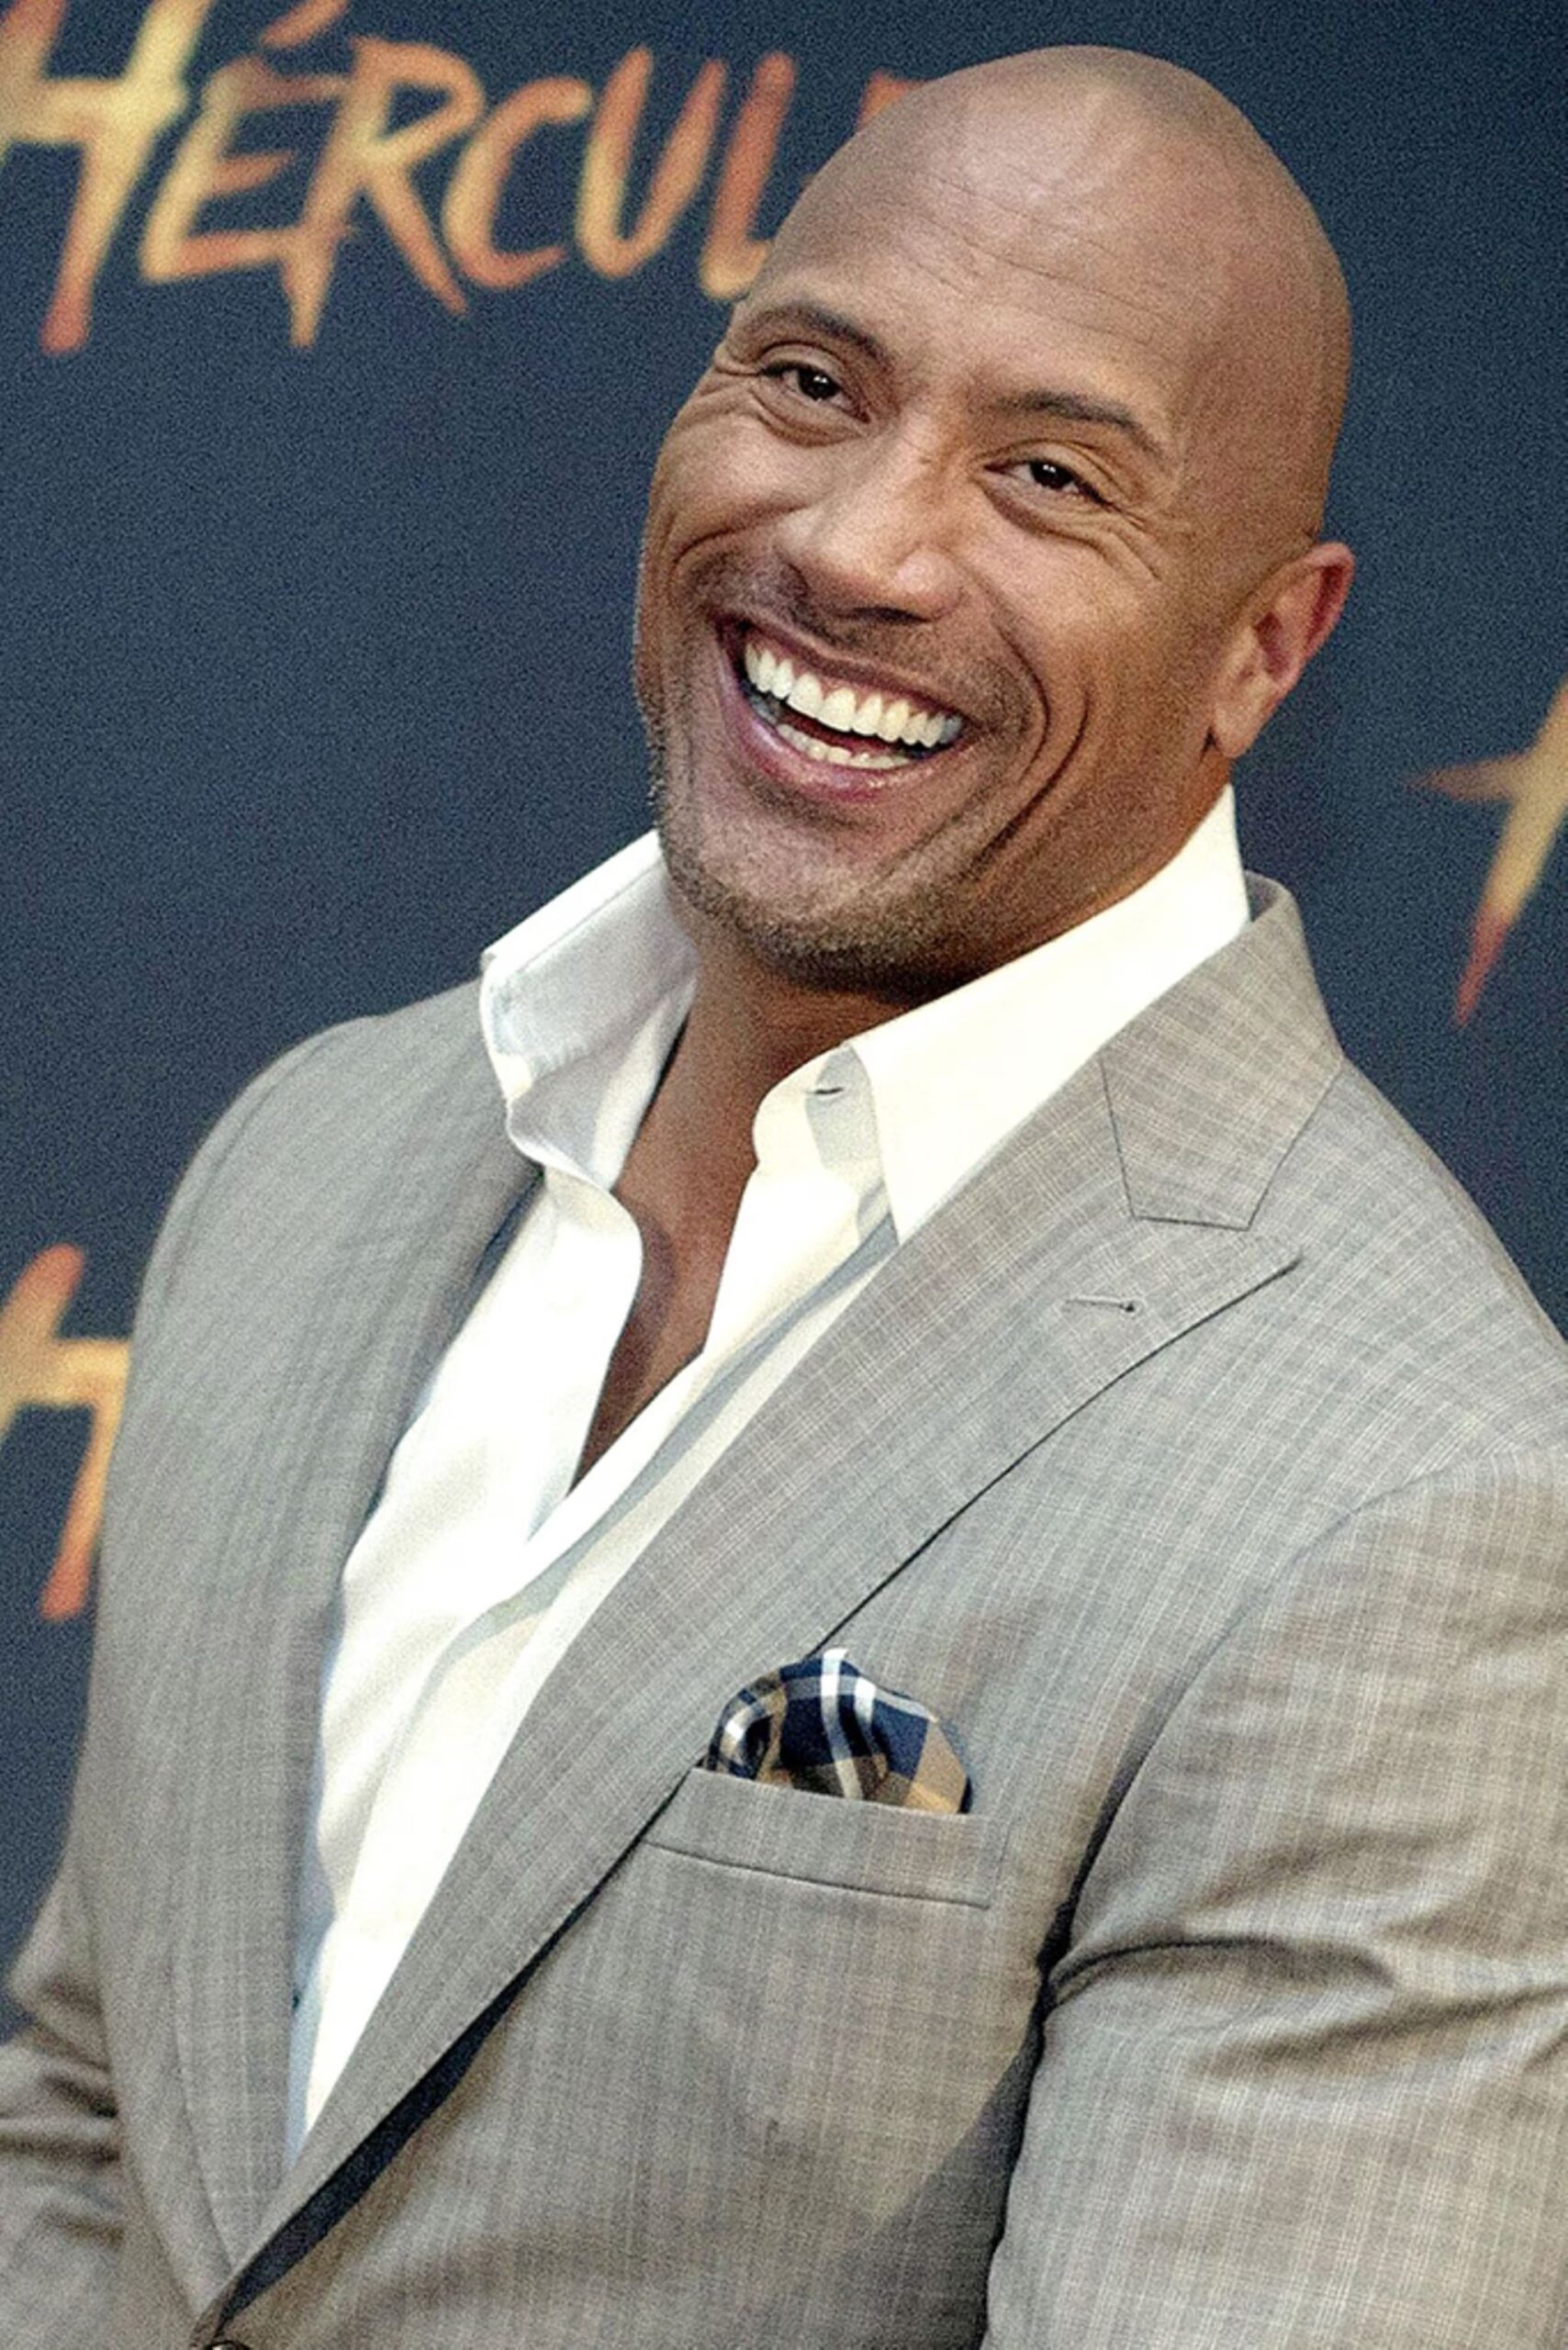 Dwayne Johnson Age: How old is the WWE Wrestler?